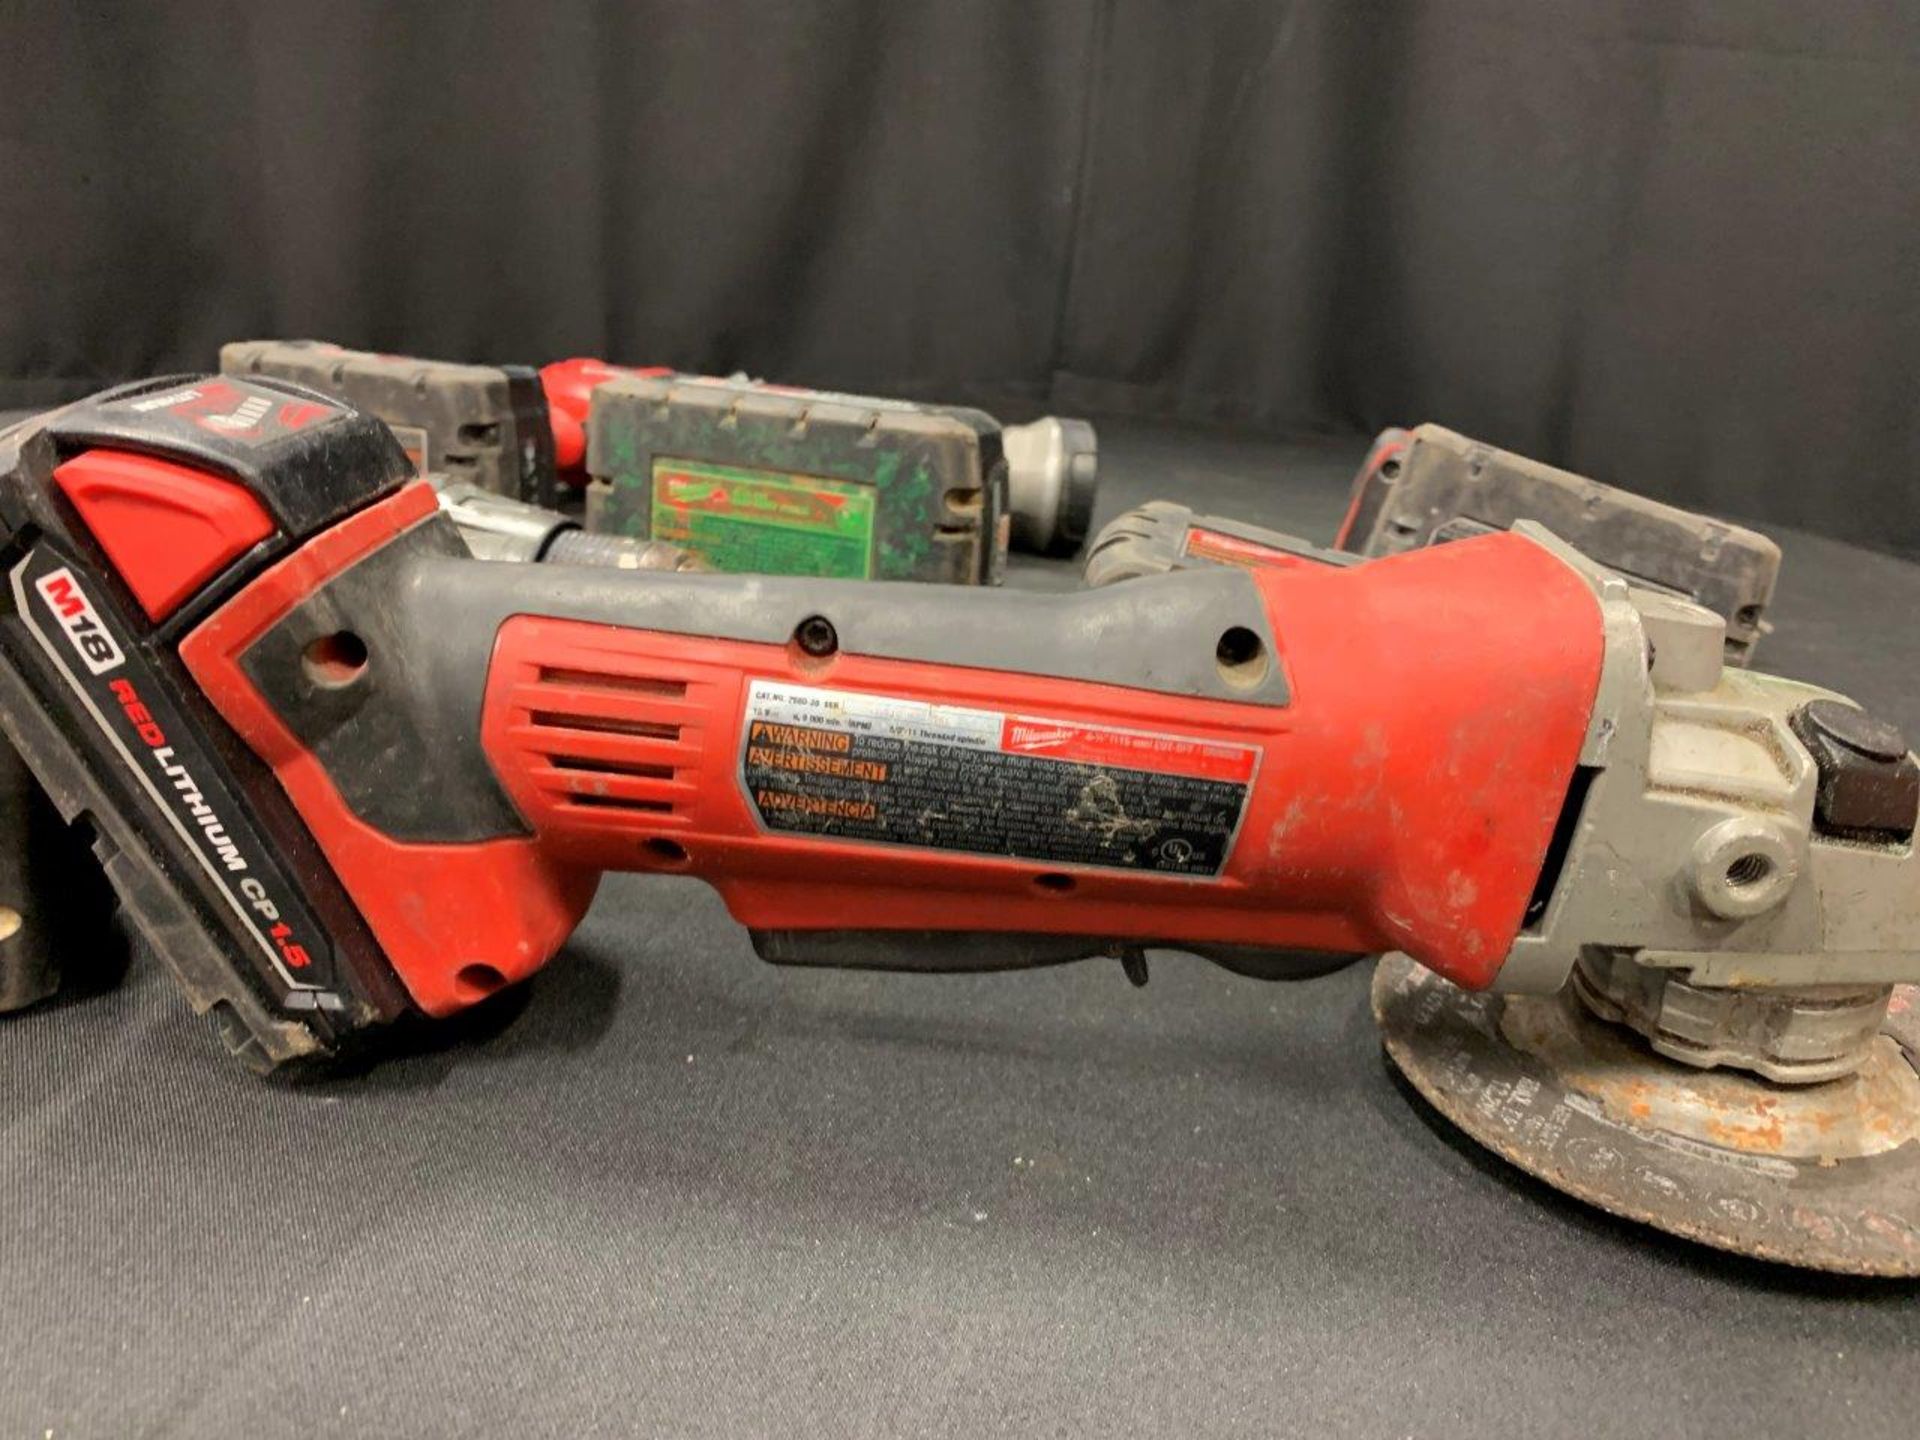 MILWAUKEE CORDLESS ANGLE GRINDER, DRILL, IMPACT DRIVER, FLASHLIGHT, ASSORTED BATTERIES - A58 - Image 13 of 14